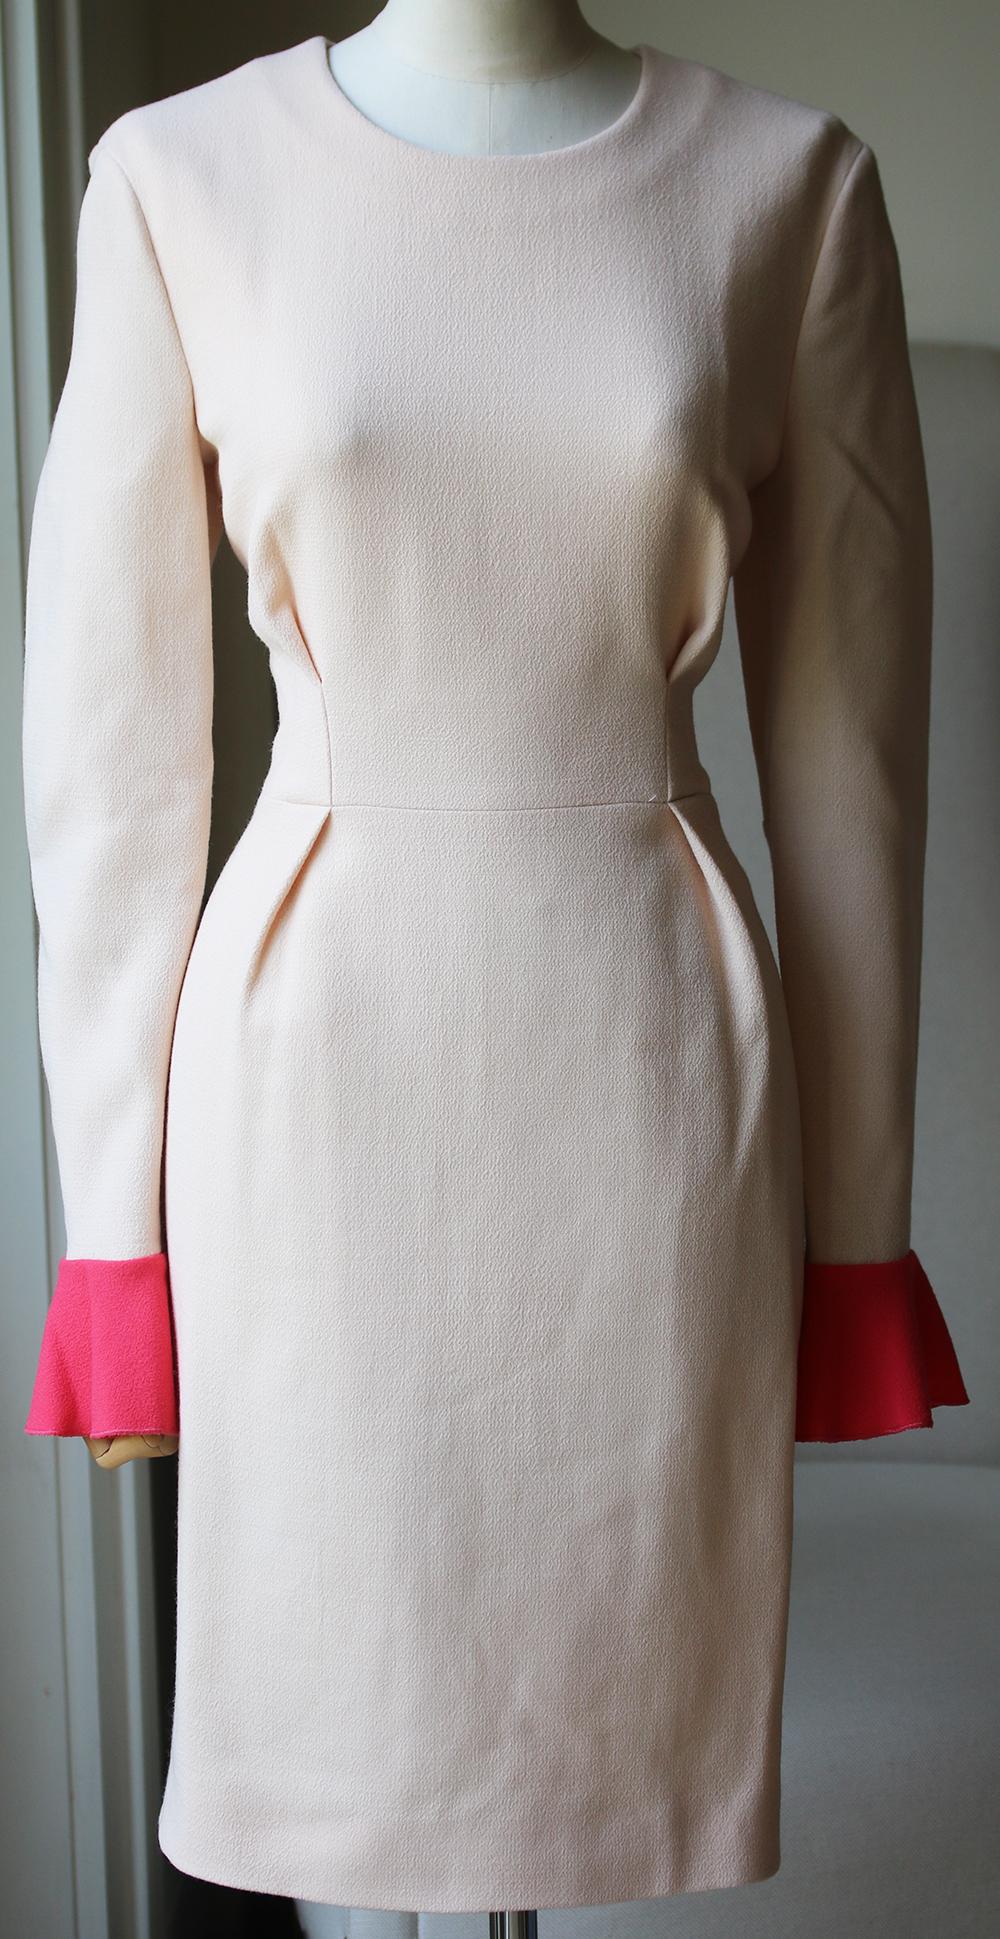 Roksanda Ilincic's beautiful dresses are hot property on the party circuit, and we love this blush wool-crepe design with contrasting royal-blueruffled cuffs. Cut for a super sleek silhouette, this ladylike piece is destined for the chicest events